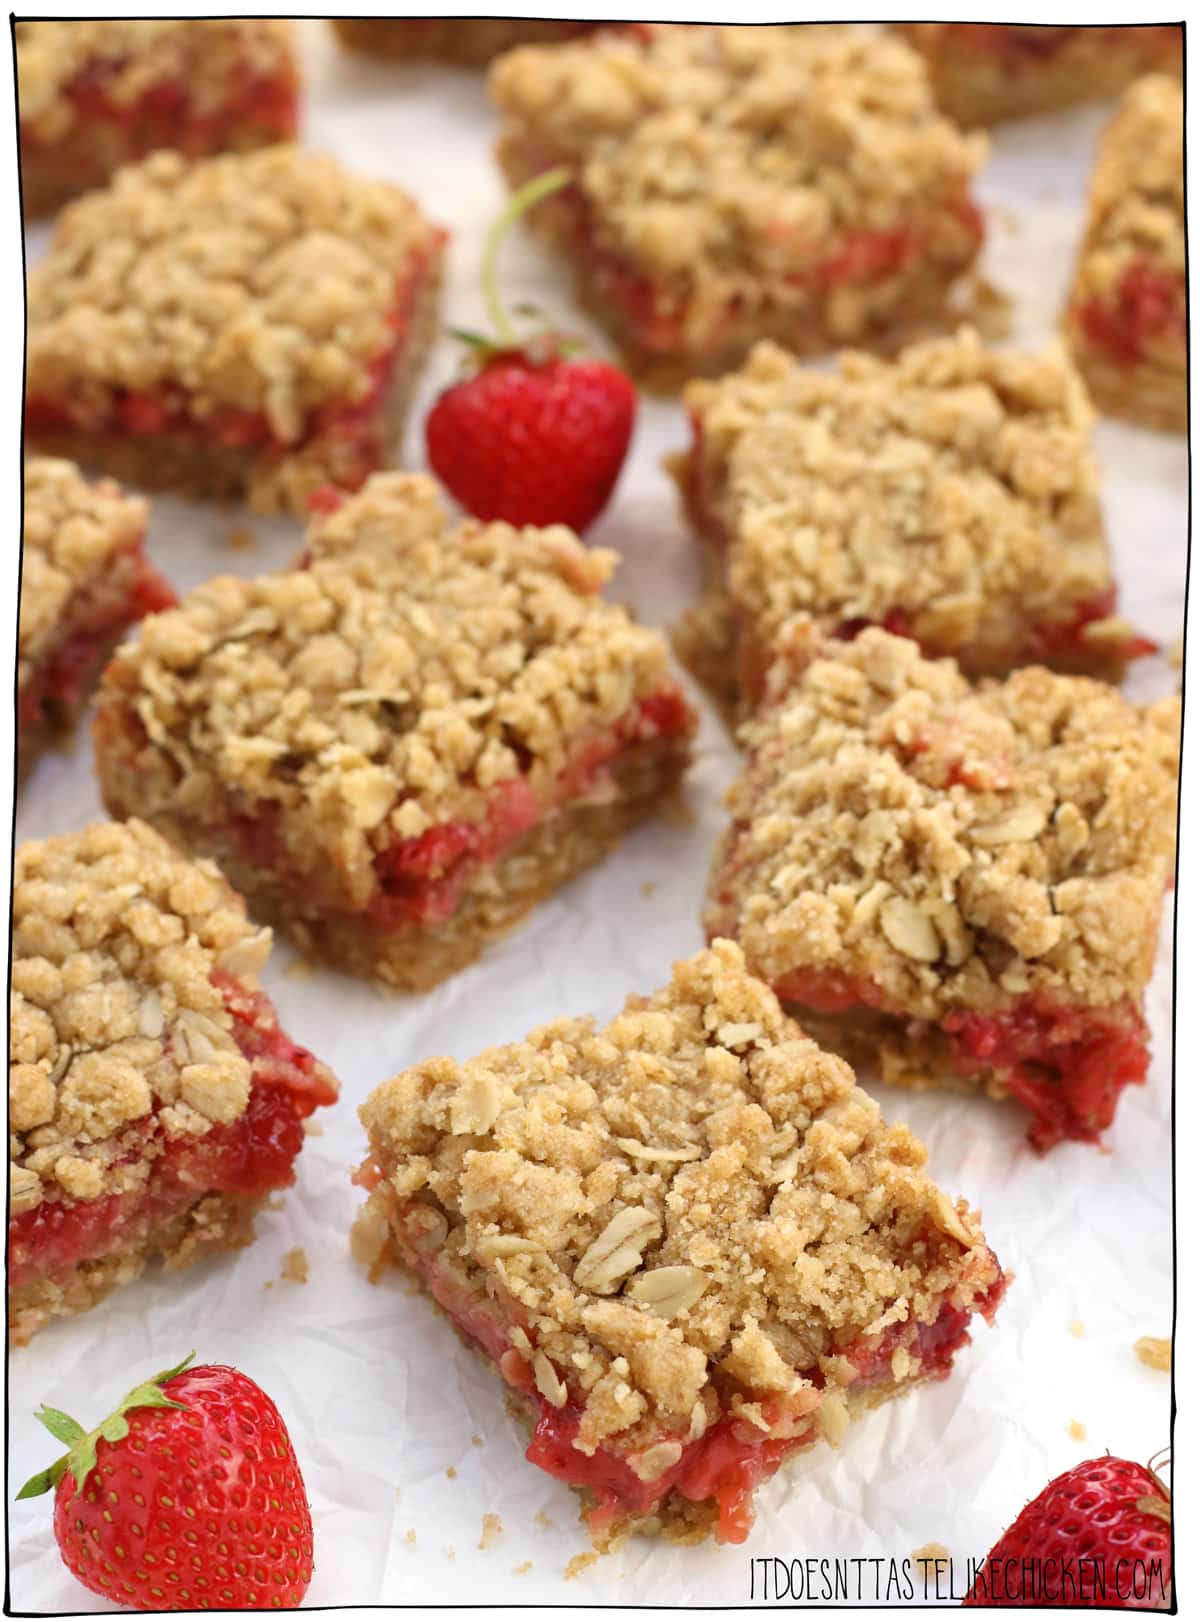 Vegan Strawberry Oat Bars! Sweet gooey strawberry filling surrounded by crumbly oatmeal cookie pastry, these old fashioned bars are summer dessert perfection! #itdoesnttastelikechicken #veganrecipe #vegandessert